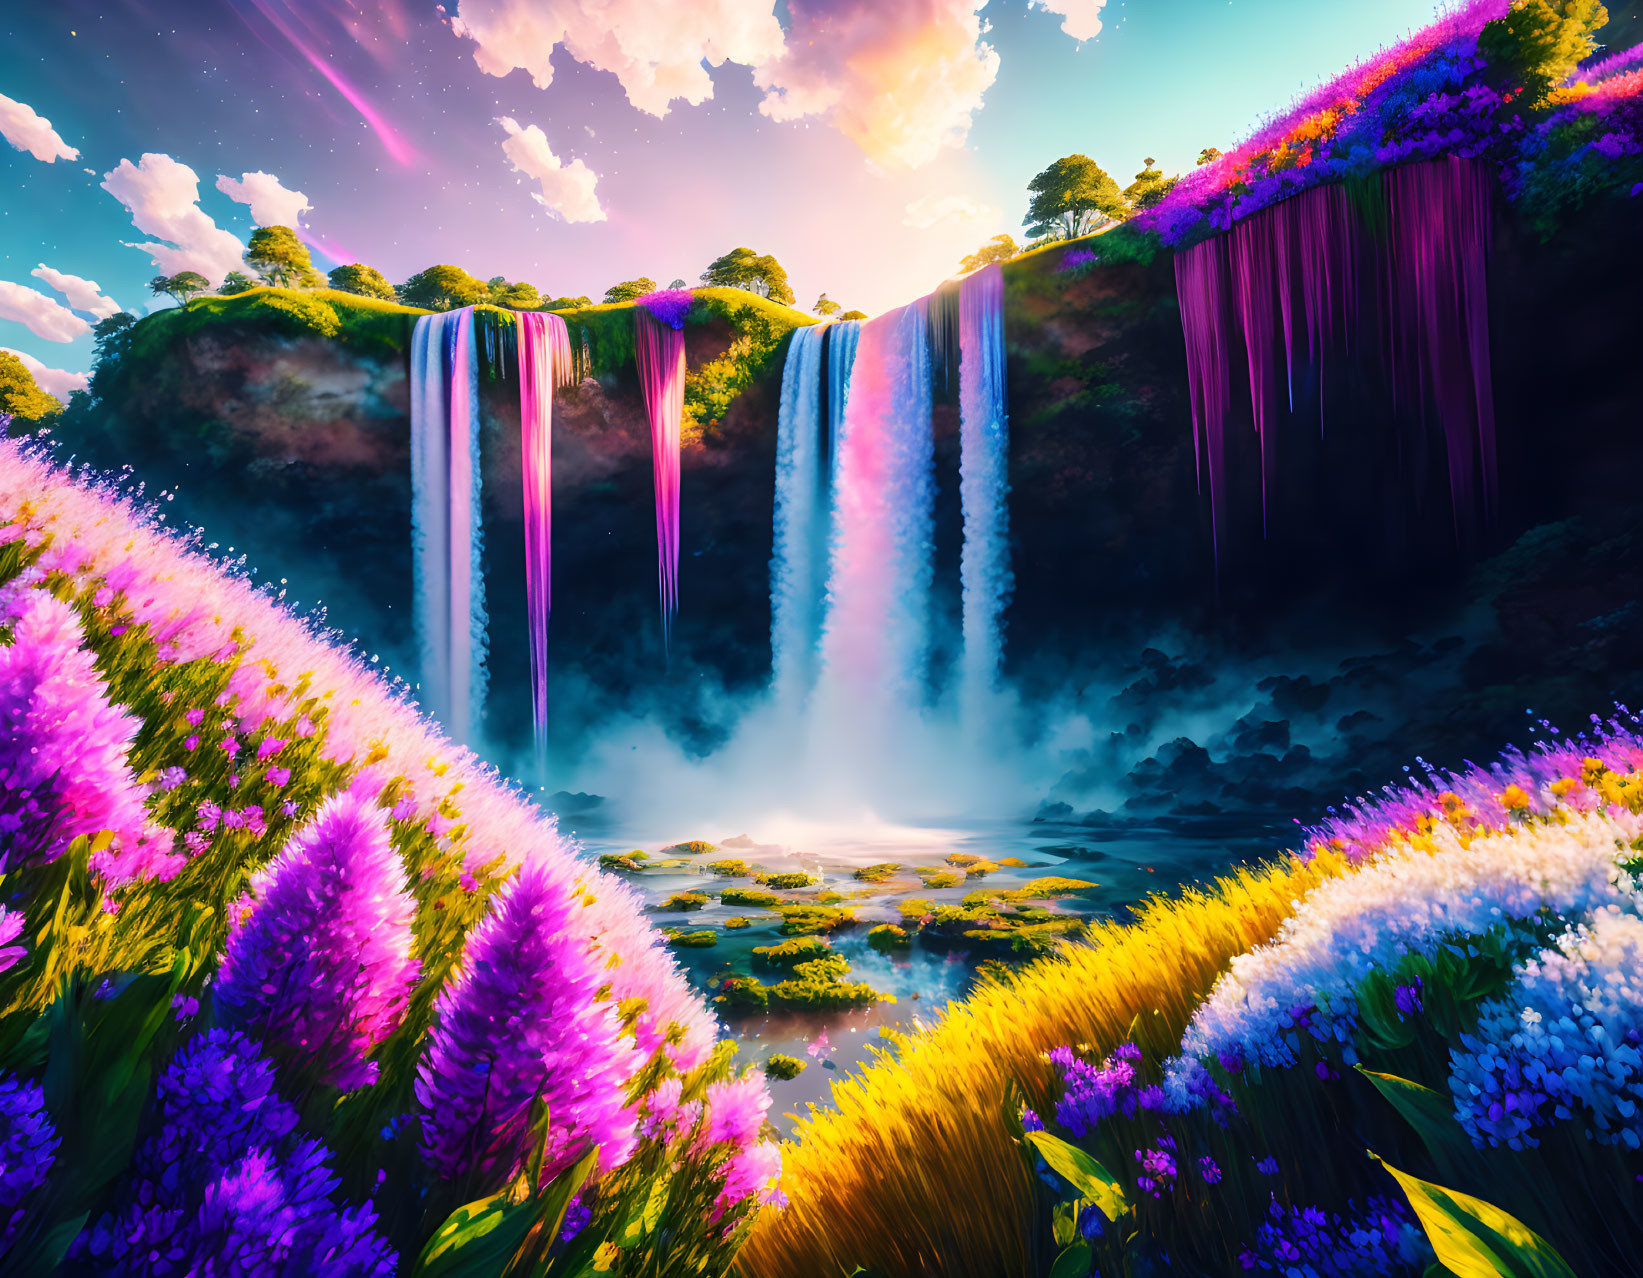 Surreal landscape with waterfall, colorful sky, and purple flowers